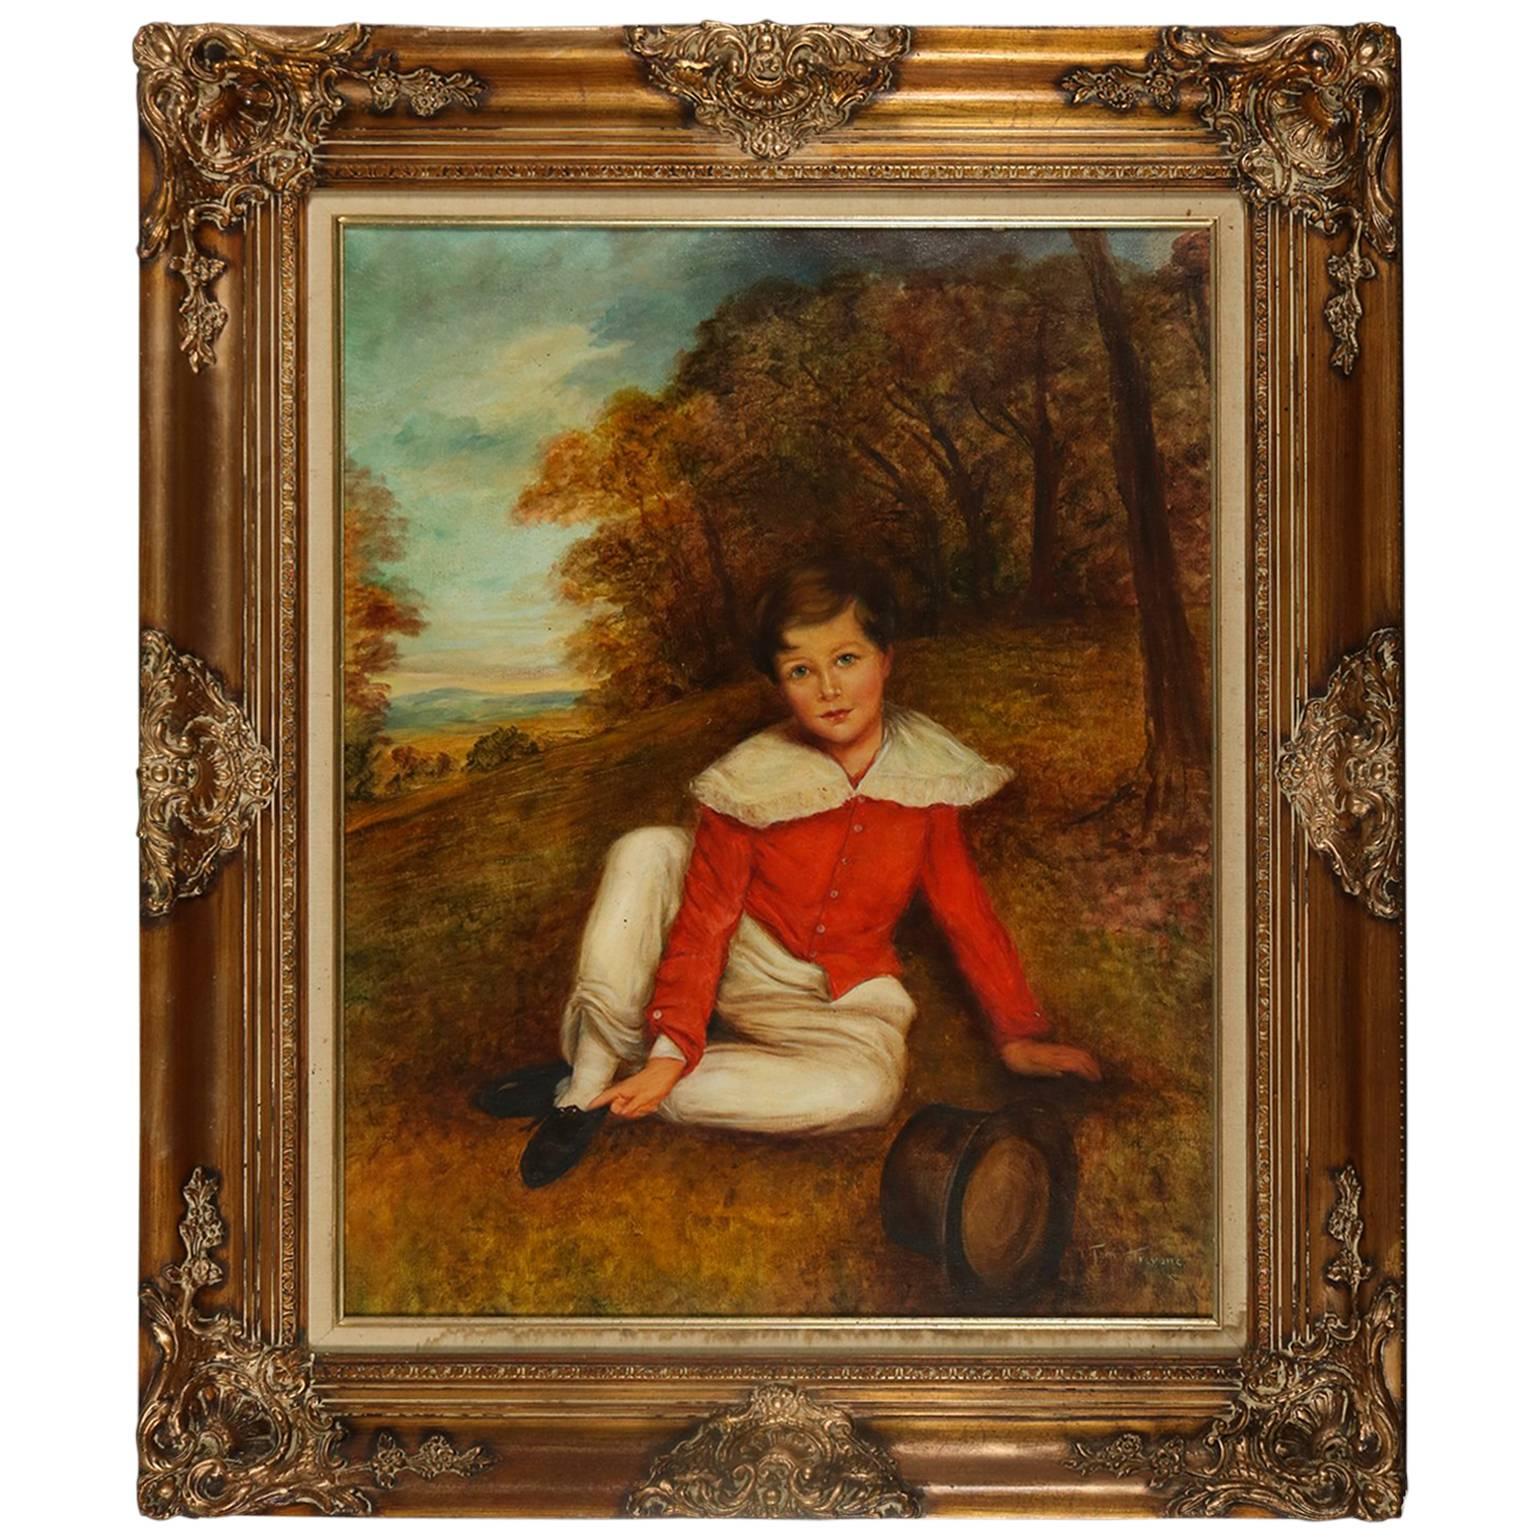 Vintage and Large Oil on Canvas Portrait of Child by T. Trevari, 20th Century